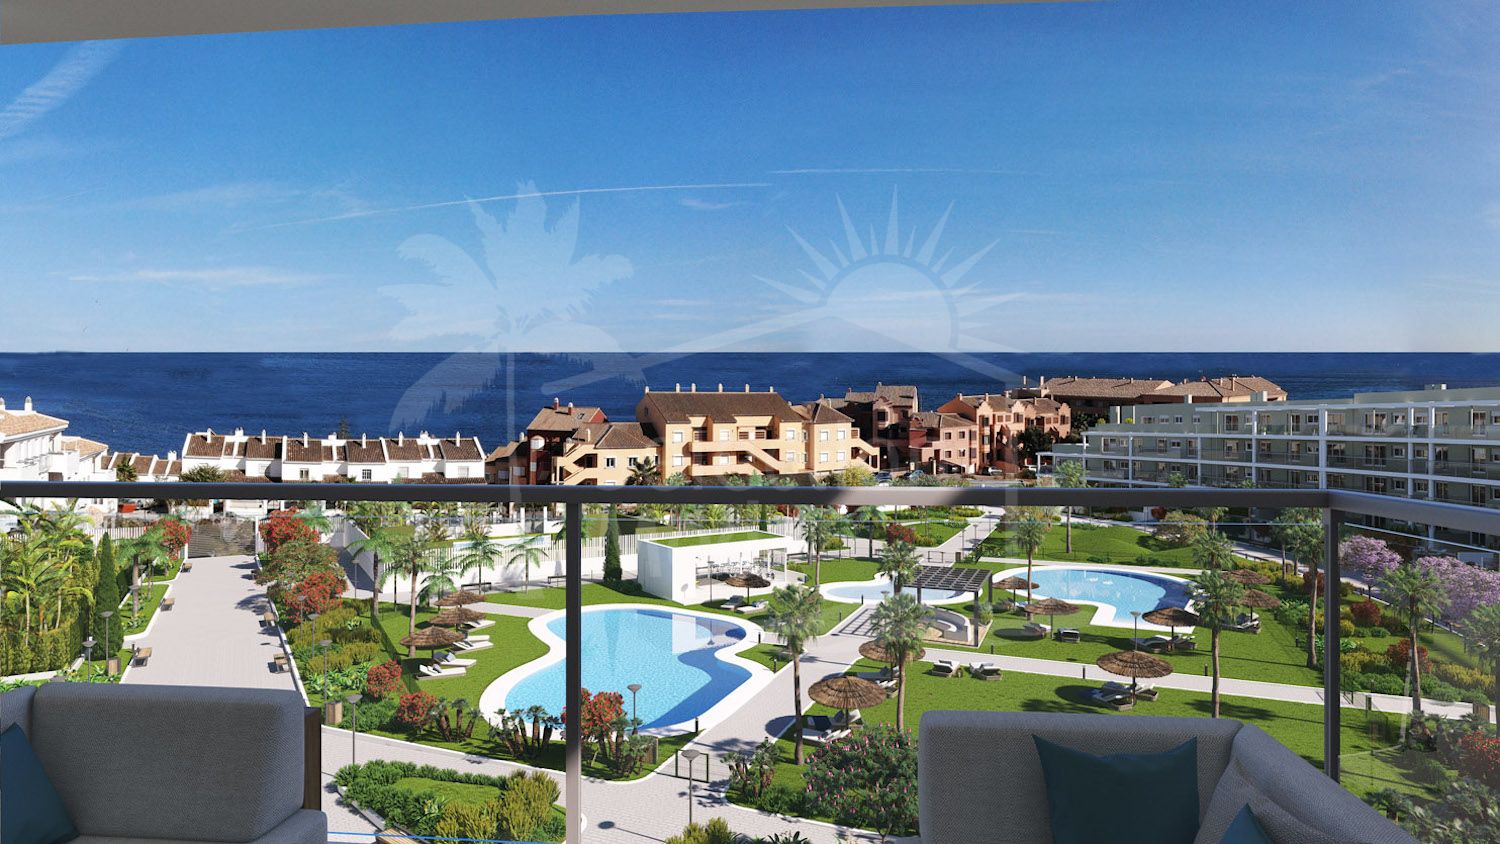 First Floor Off Plan 2 Bedroom Apartment, Walking Distance to the Beach in Manilva.